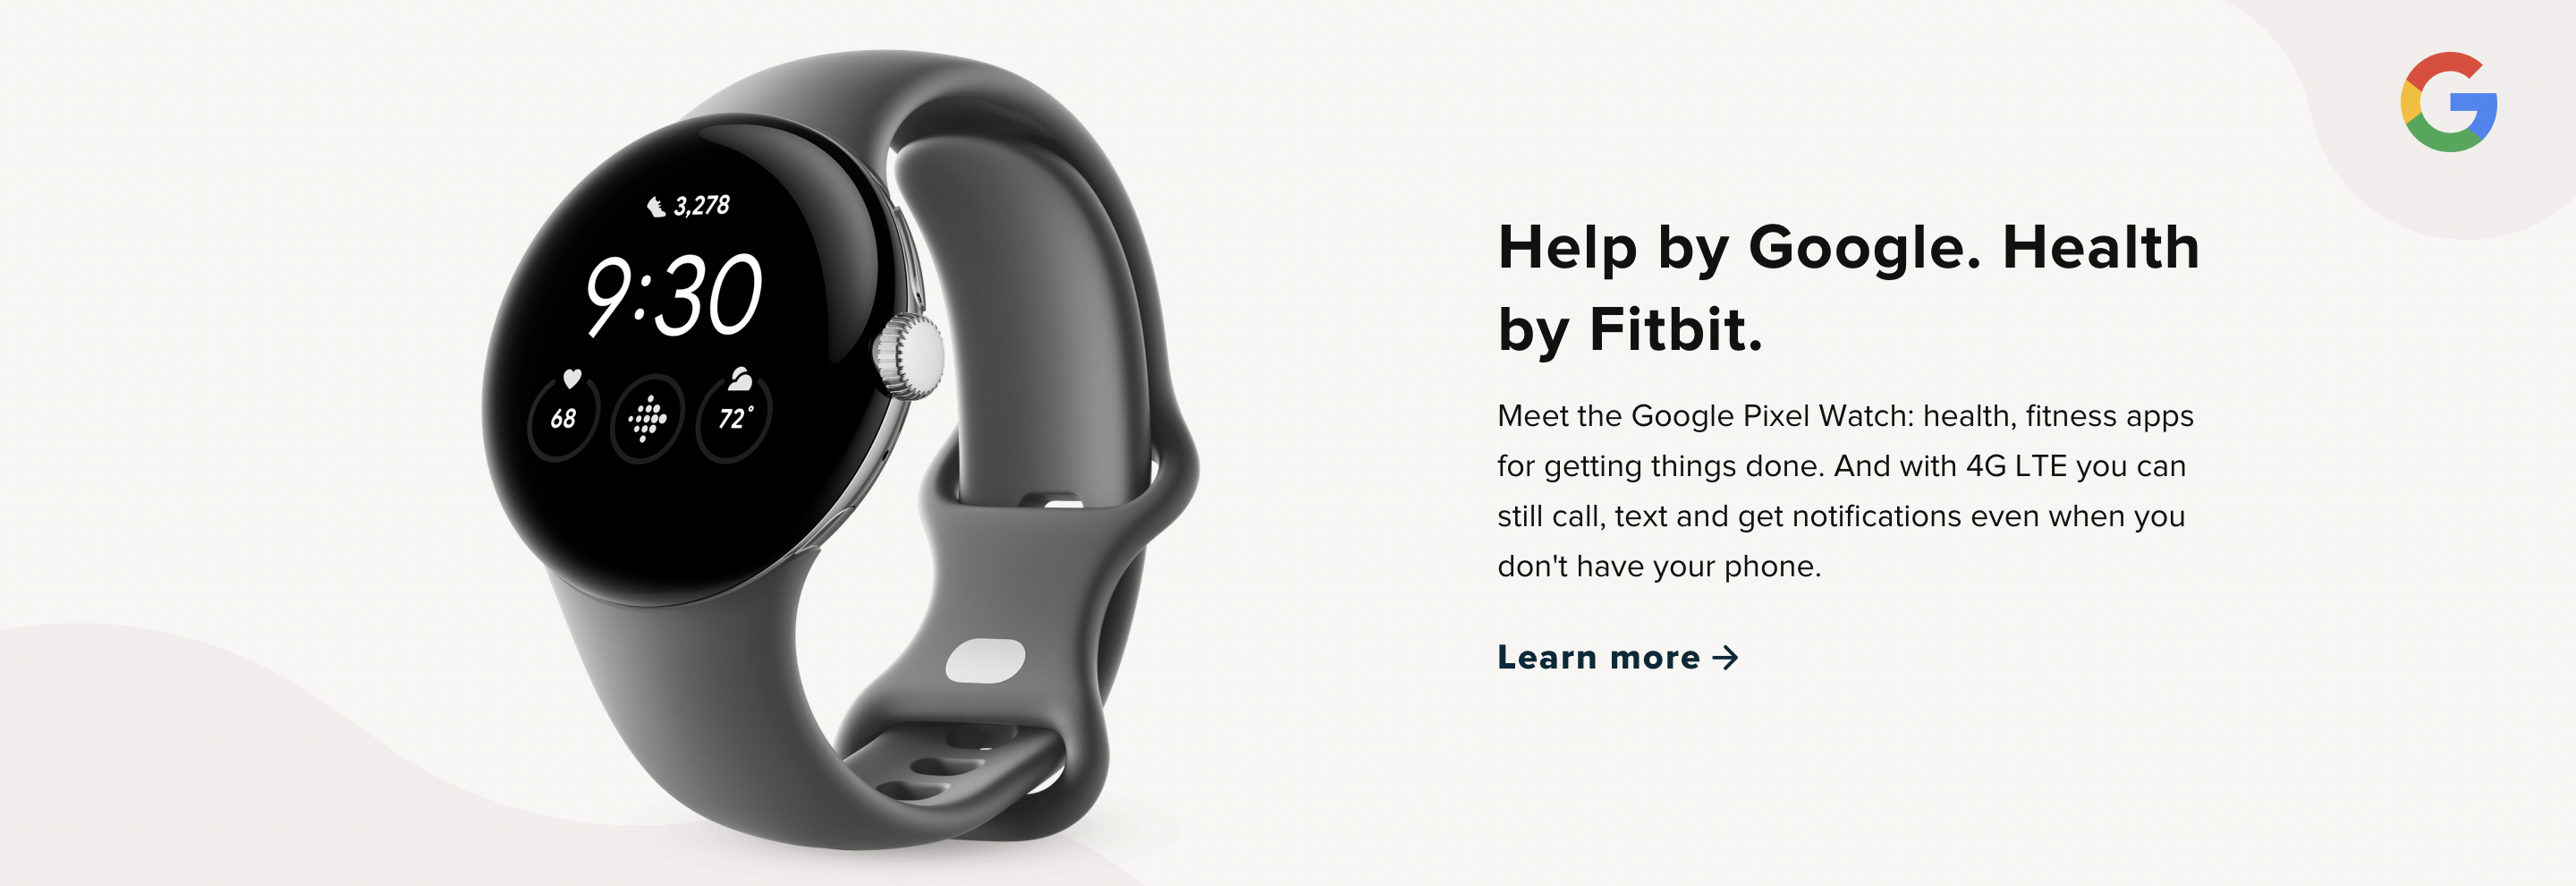 Inarticle-fitbit